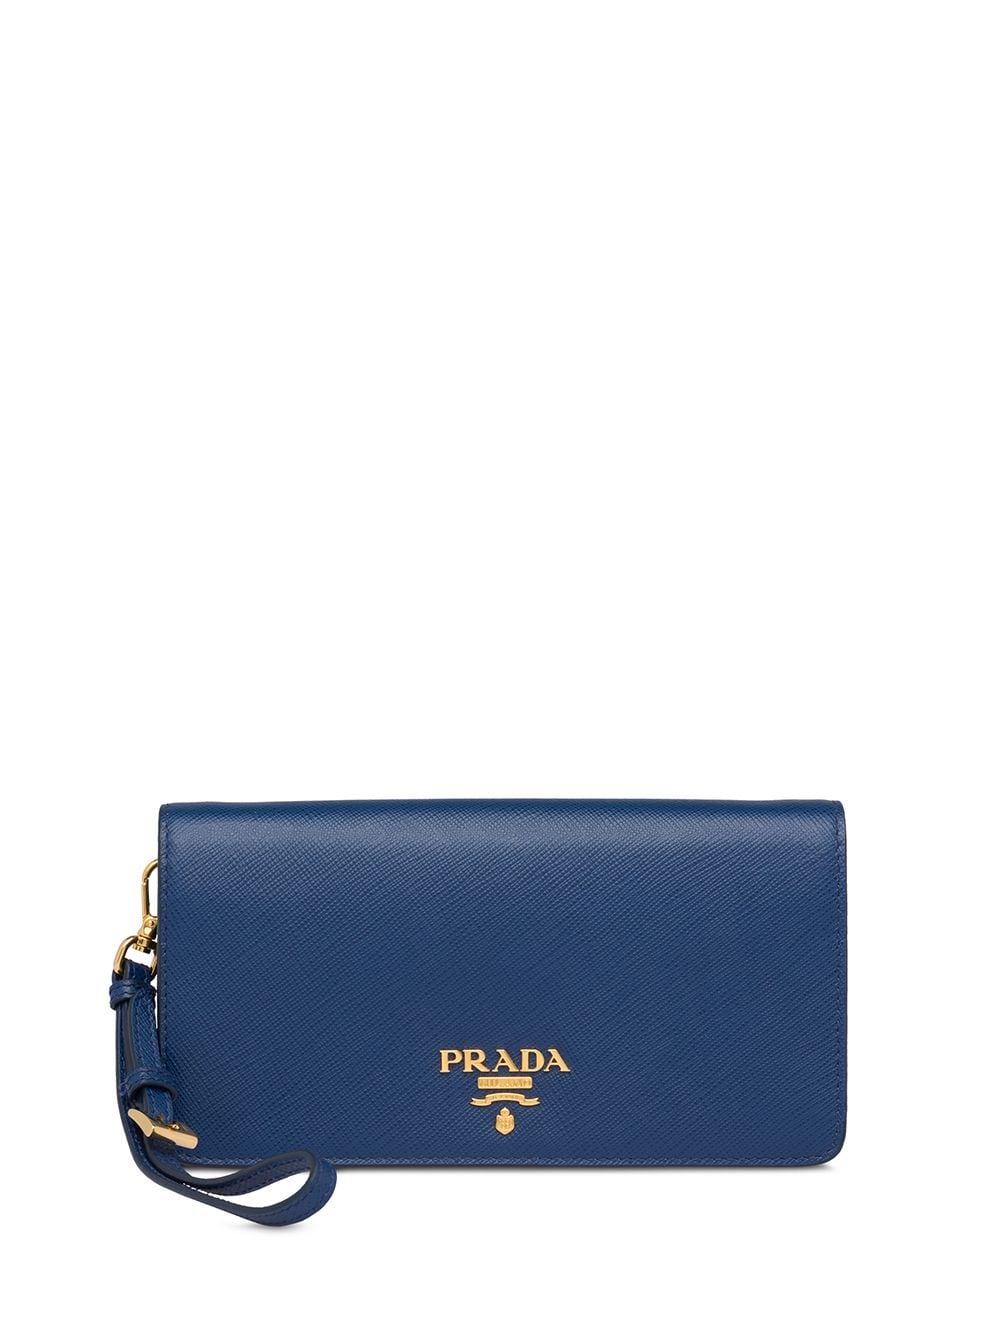 How to Spot a Fake Prada Bag, Purse, or Wallet (Without an Authenticity Card)